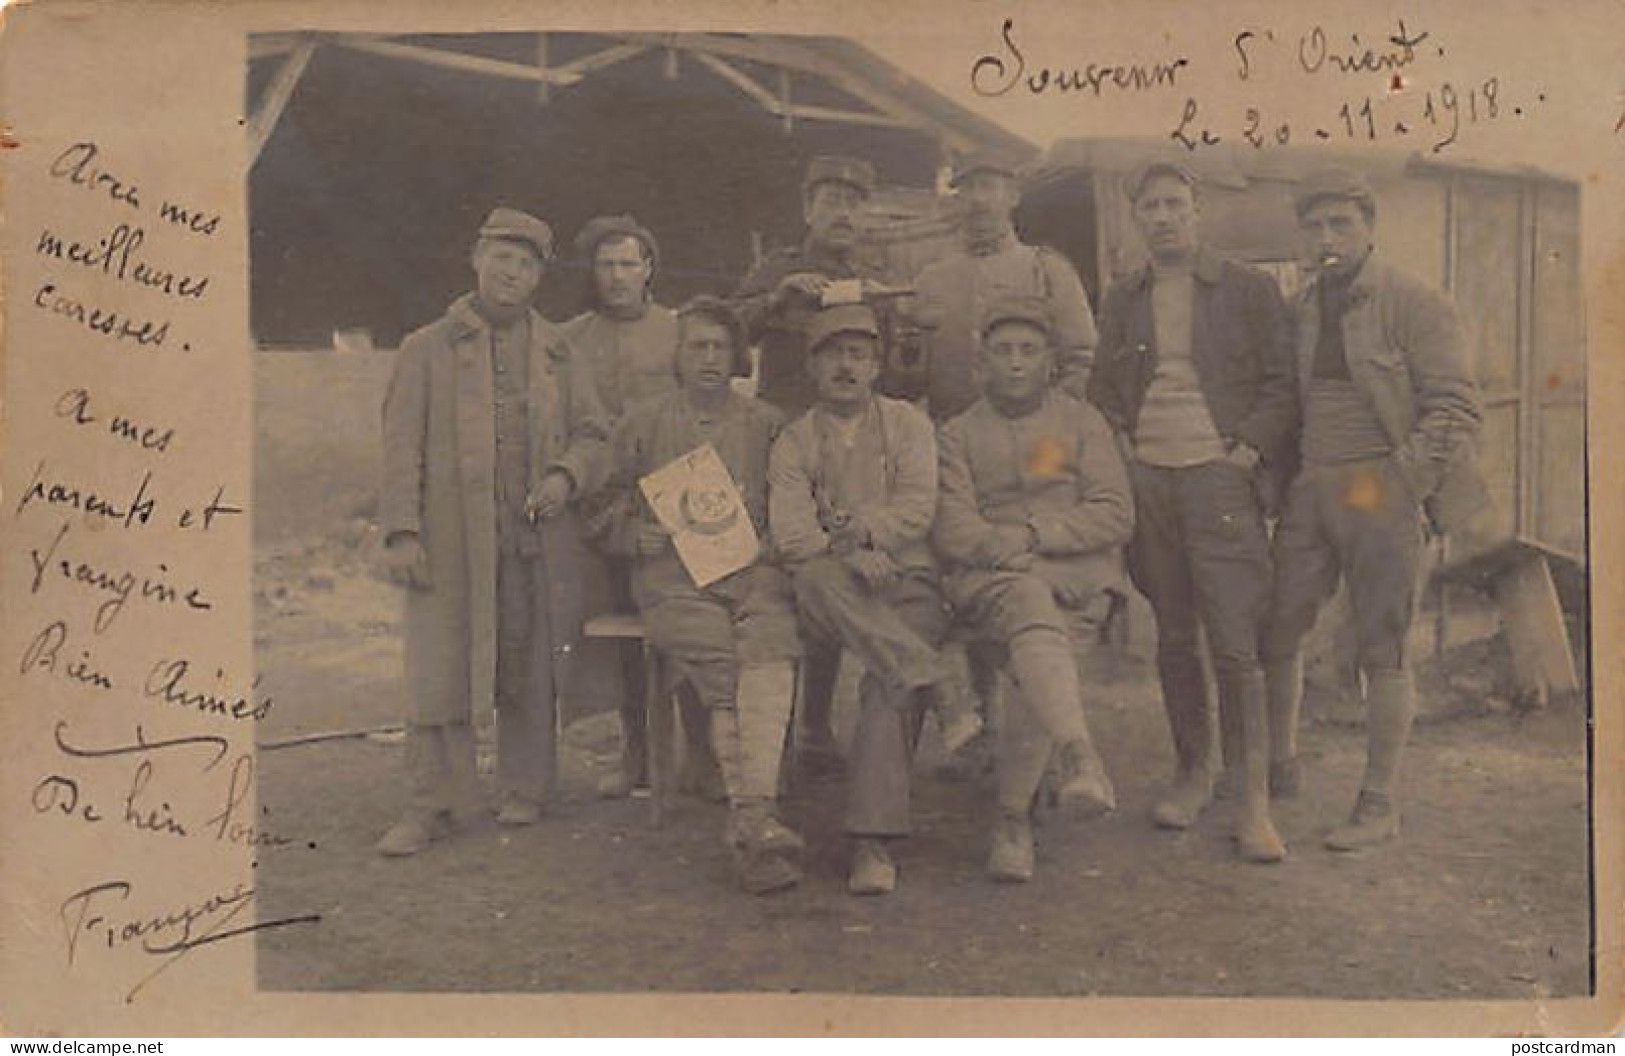 Greece - SALONICA - Group Of French Soldiers Celebrating The Armistice - REAL PHOTO - Publ. Unknown  - Grecia